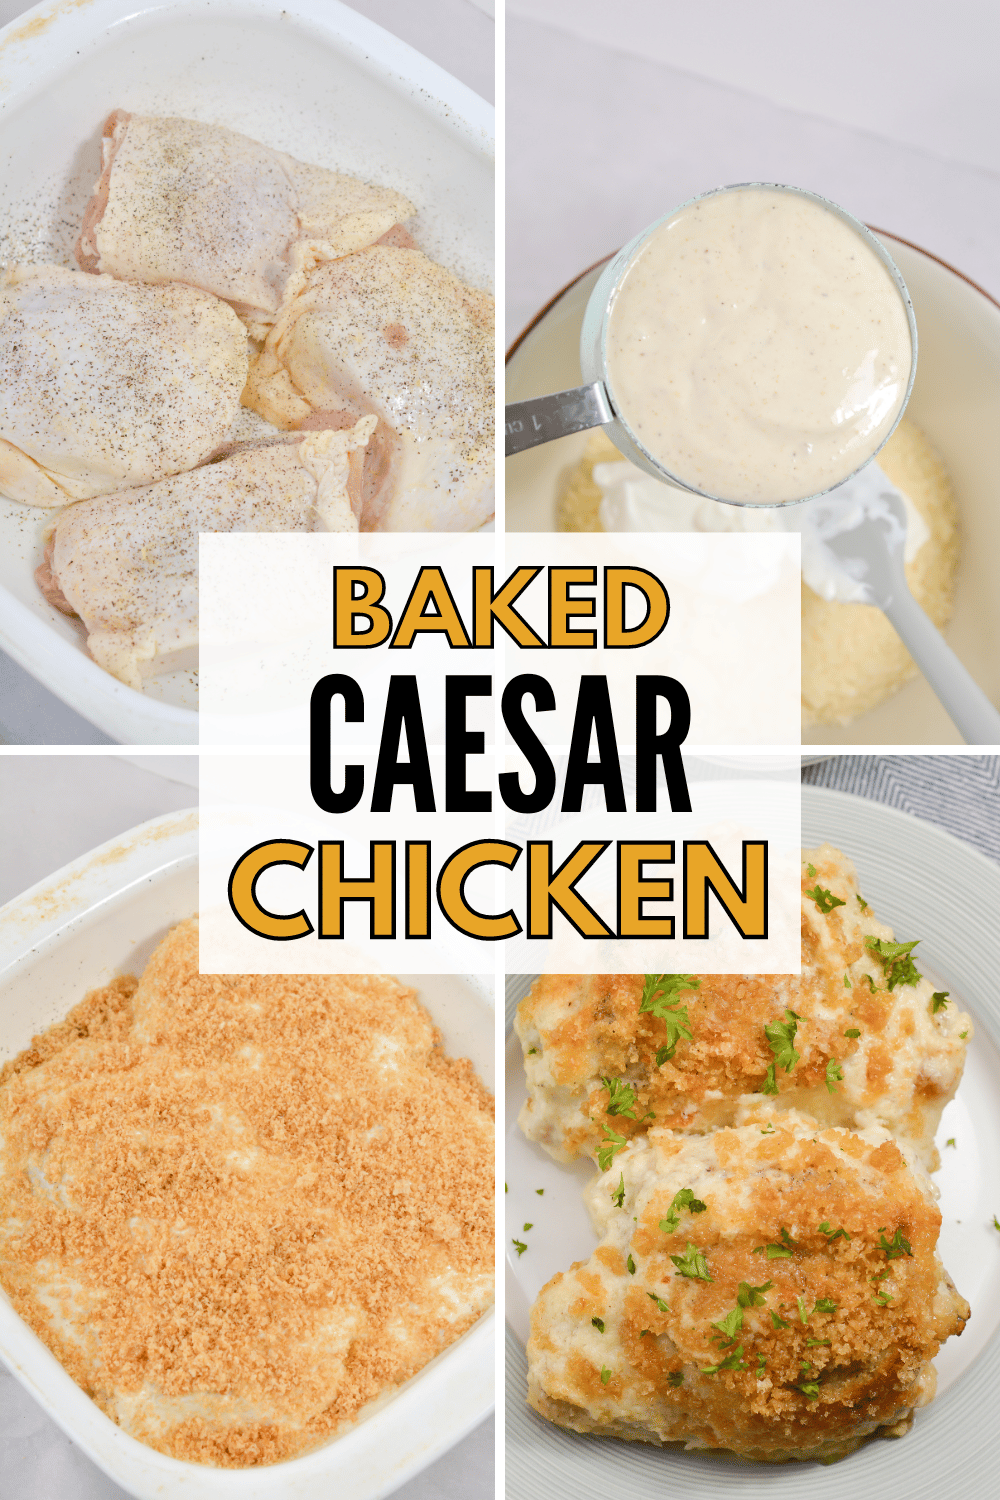 This Baked Caesar Chicken is easy to make and takes only minutes to prepare. It’s a great way to make a delicious, healthy dinner! #caesarchicken #bakedcaesarchicken #bakedchicken #chickendinner via @wondermomwannab